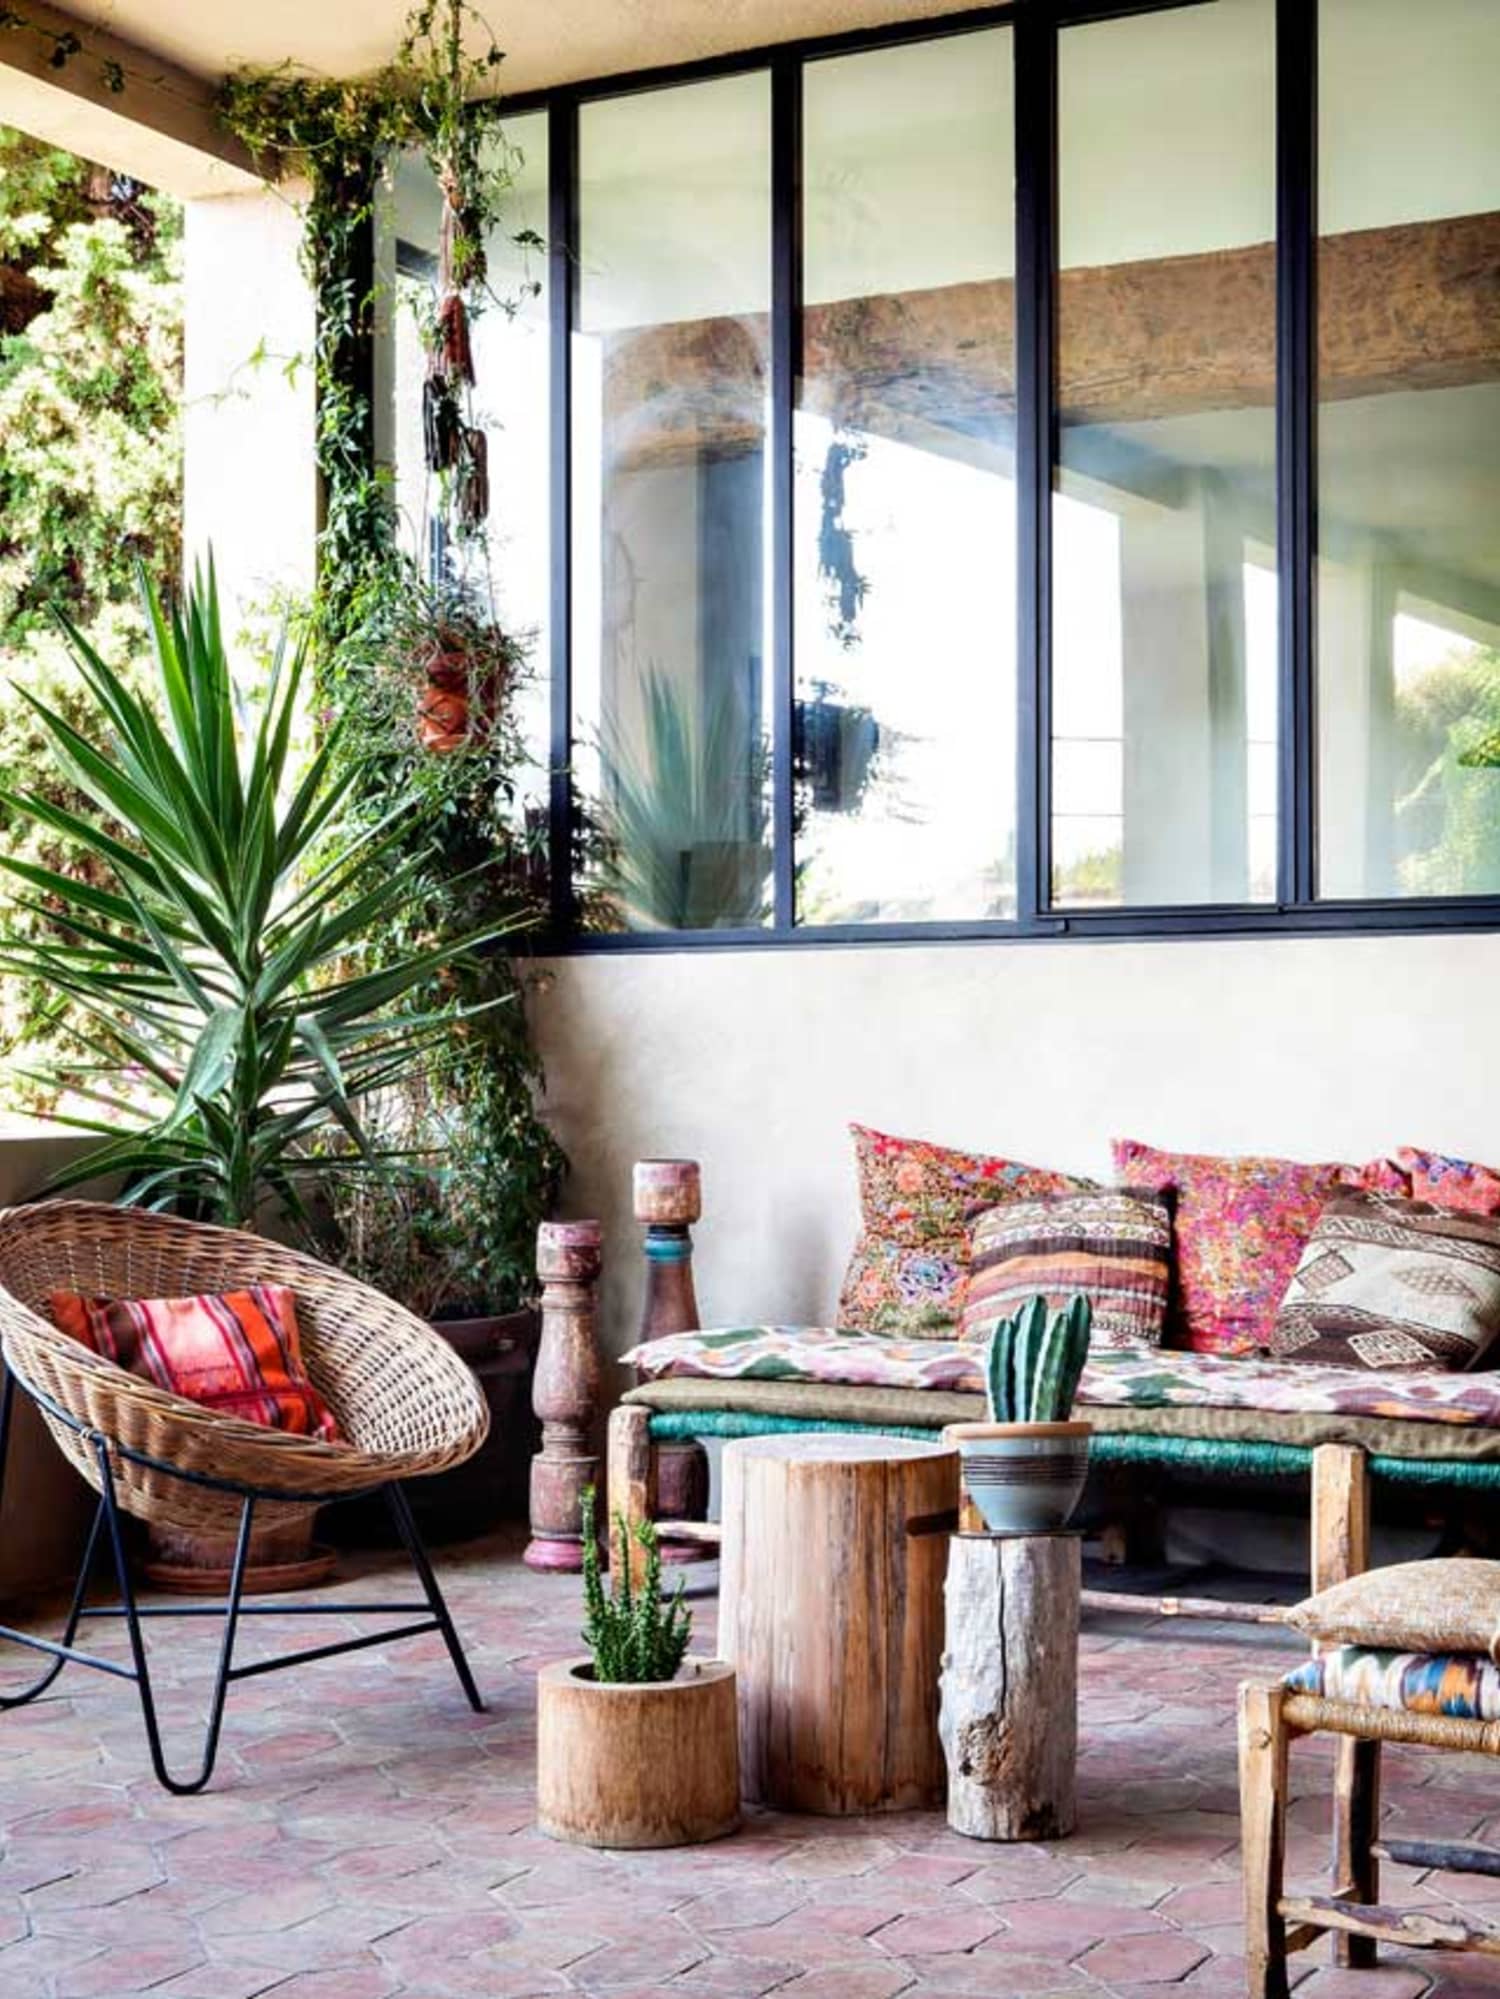 How to Add Just a Touch of Bohemian Style to Your Outdoor Space